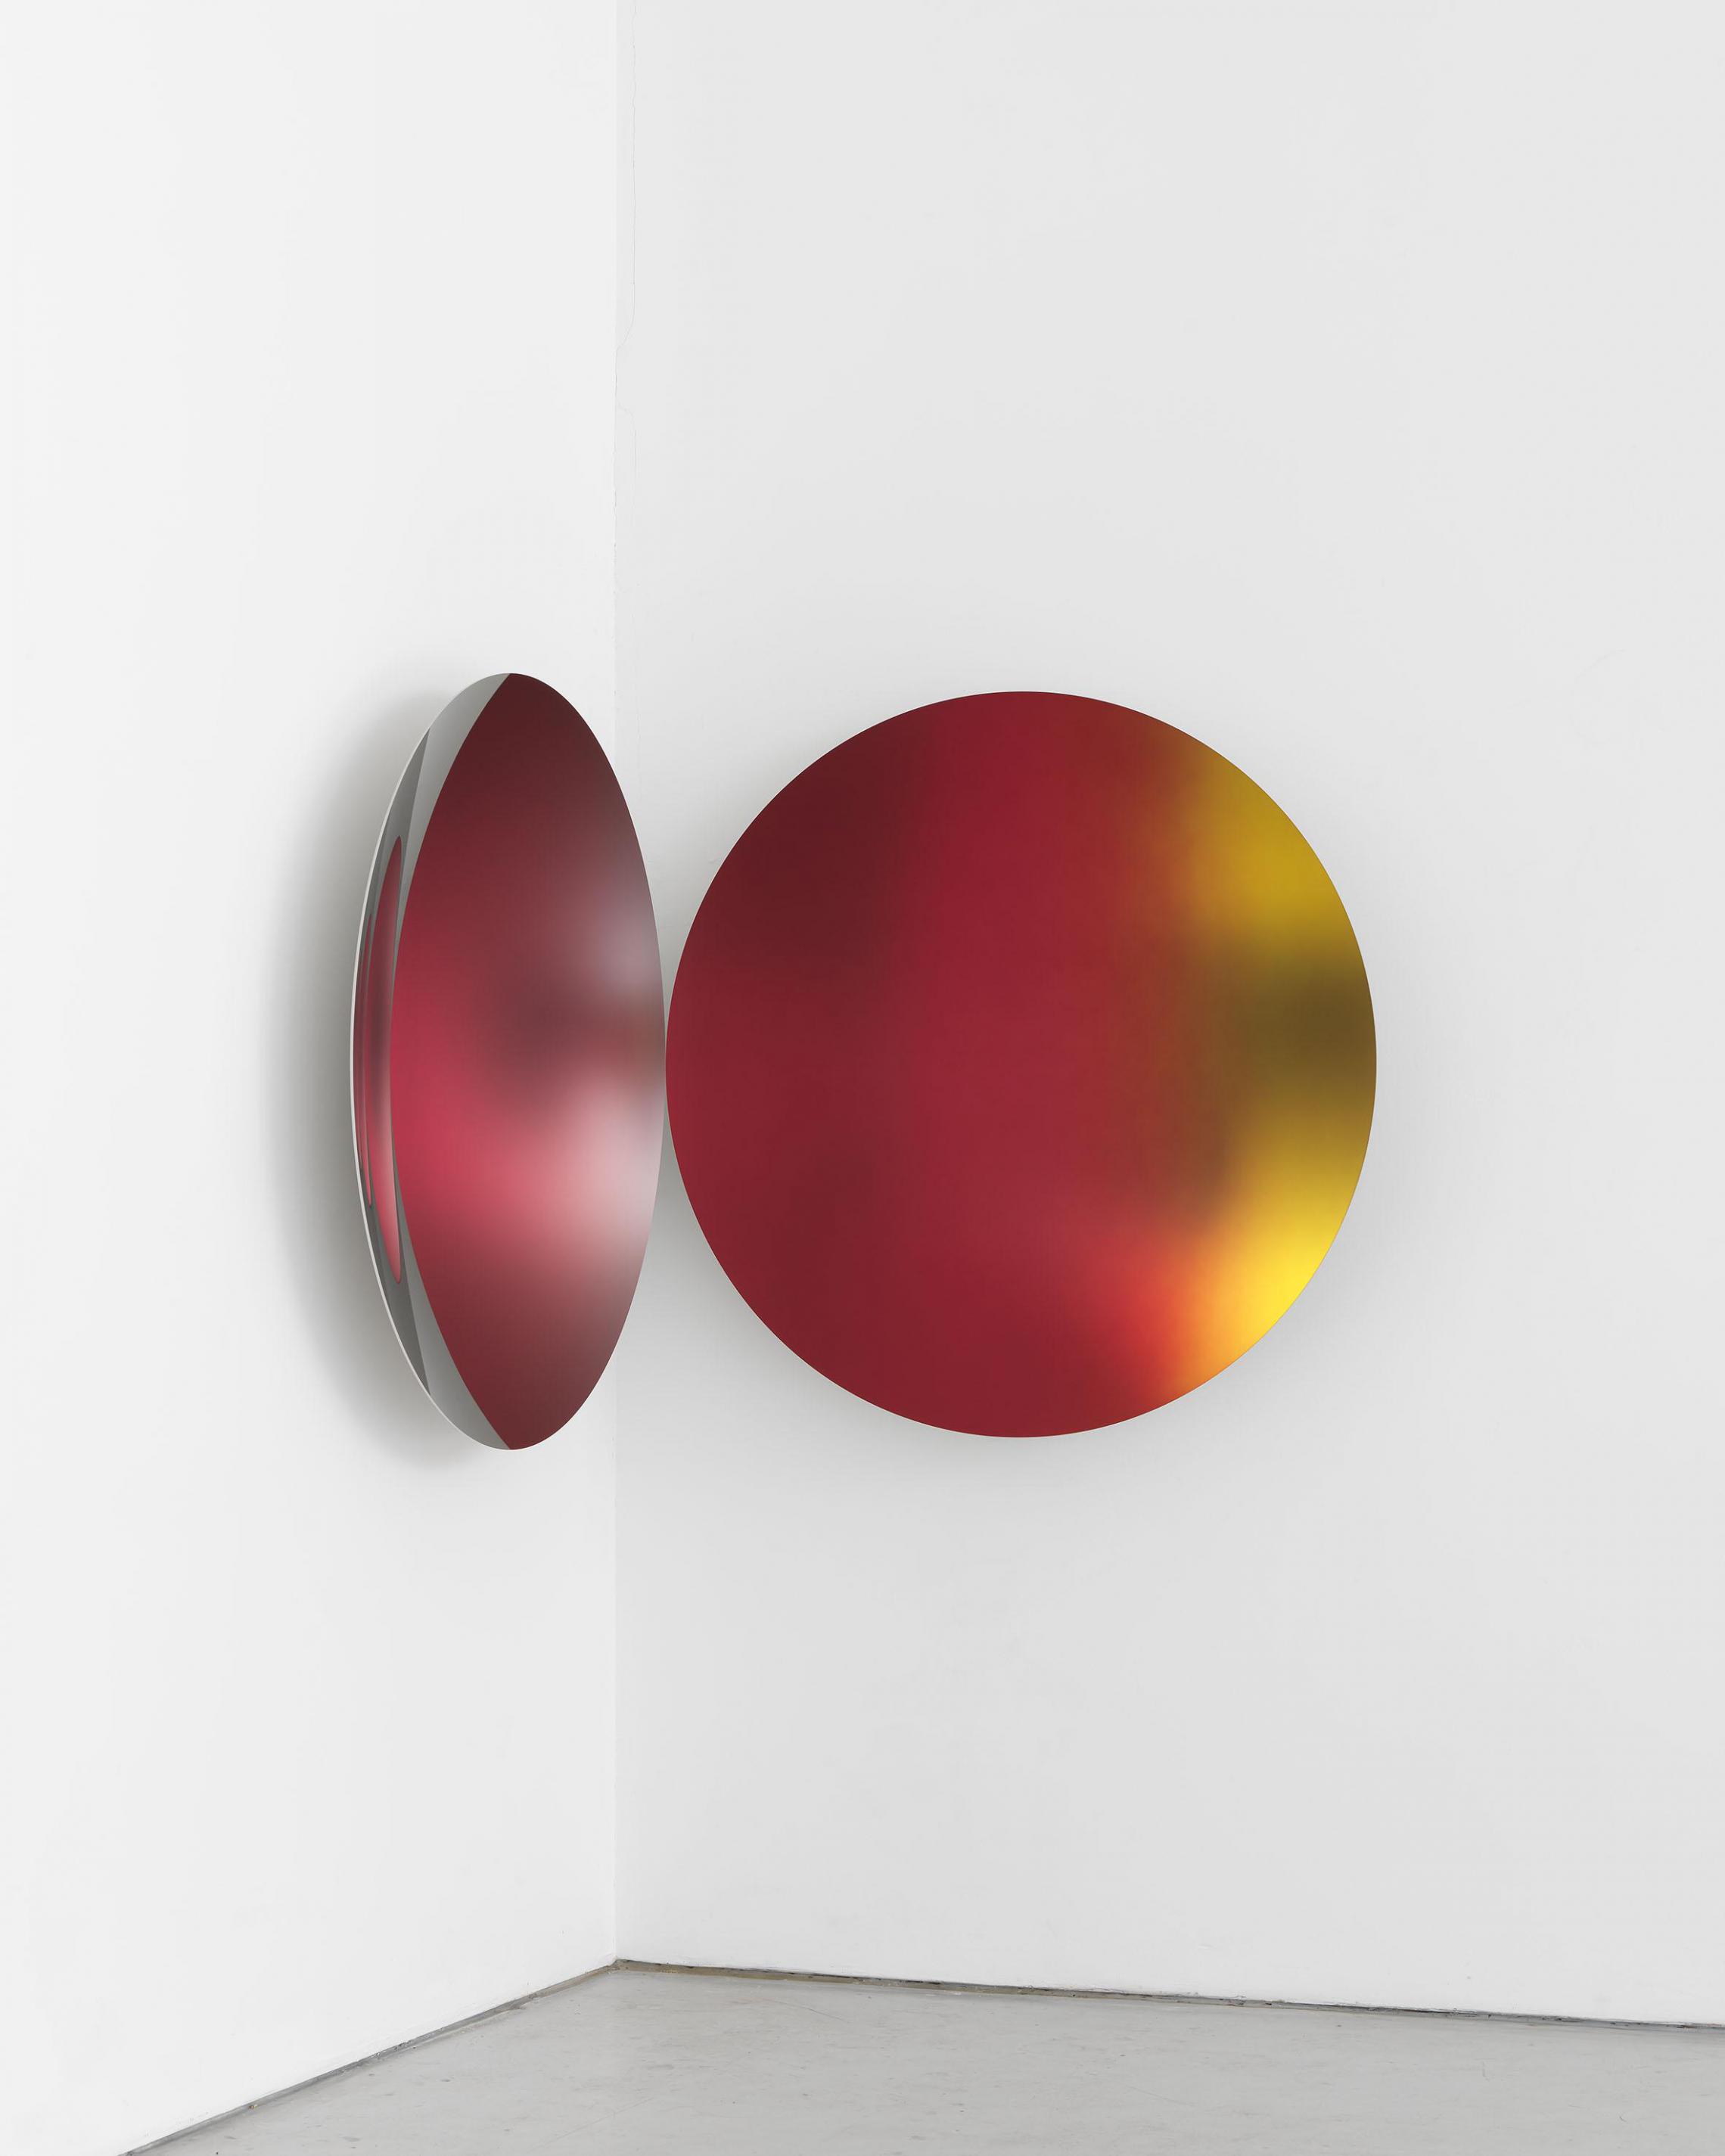 Anish Kapoor《Eclipse》 2018, Stainless steel and Lacquer, Each: 121×121×15cm